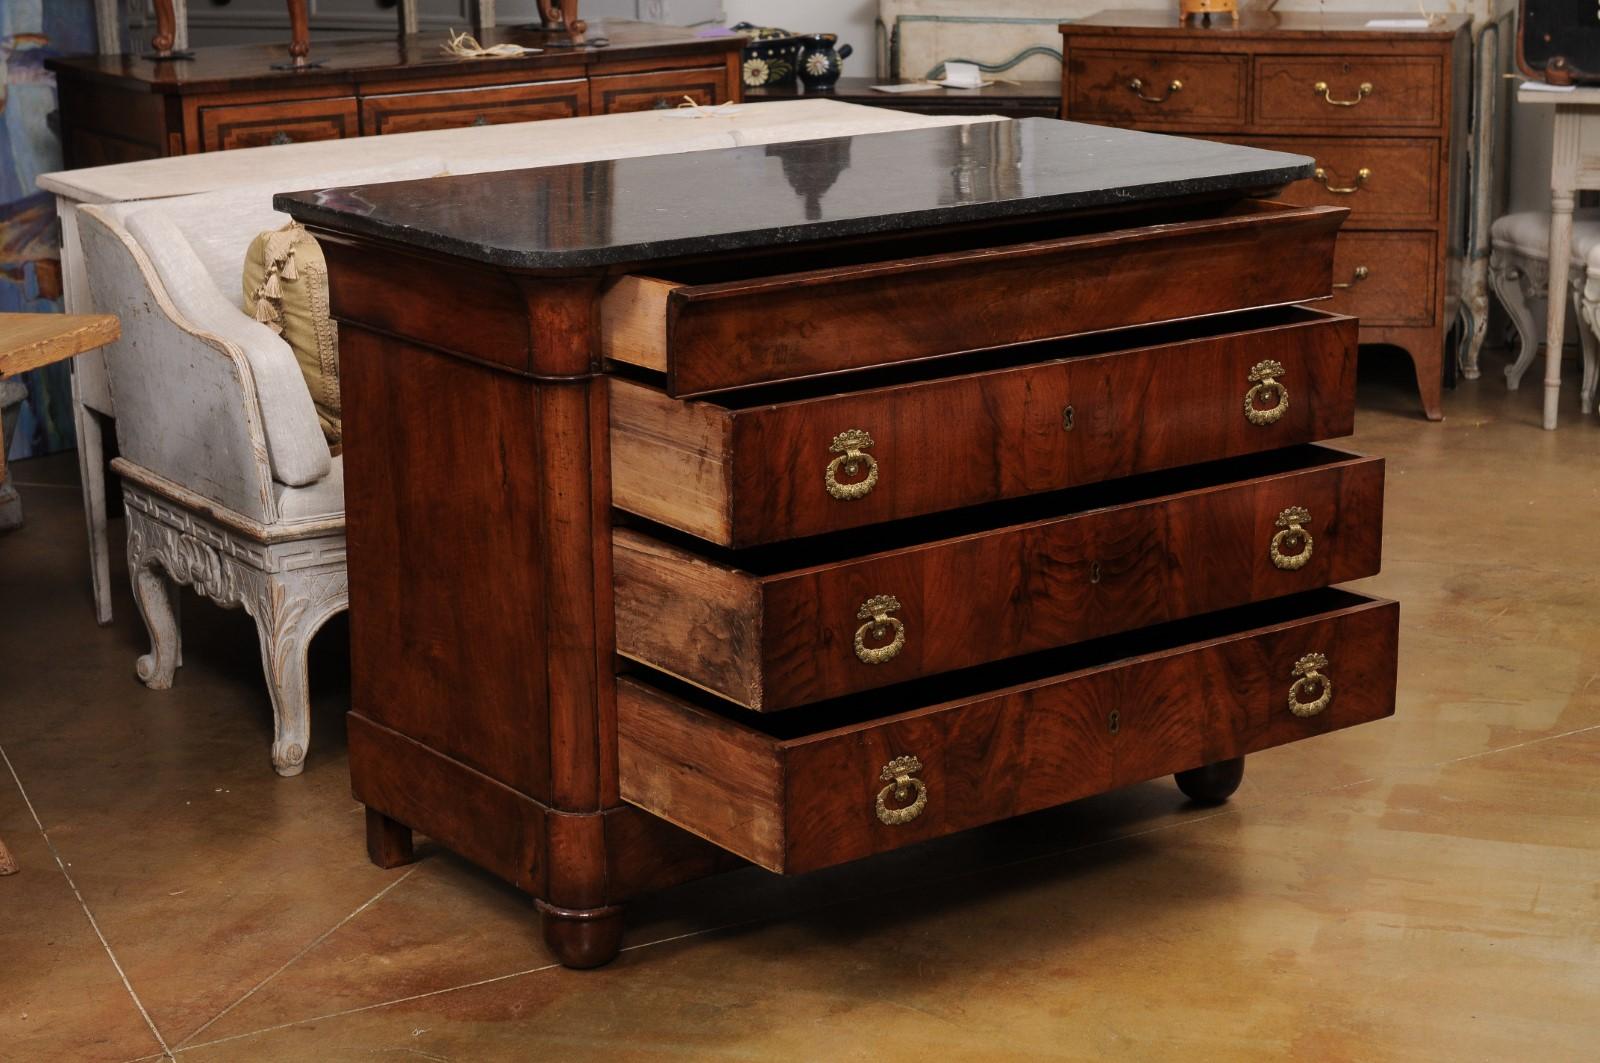 Italian Empire Style 1890s Marble Top Four-Drawer Commode with Bronze Hardware In Good Condition For Sale In Atlanta, GA